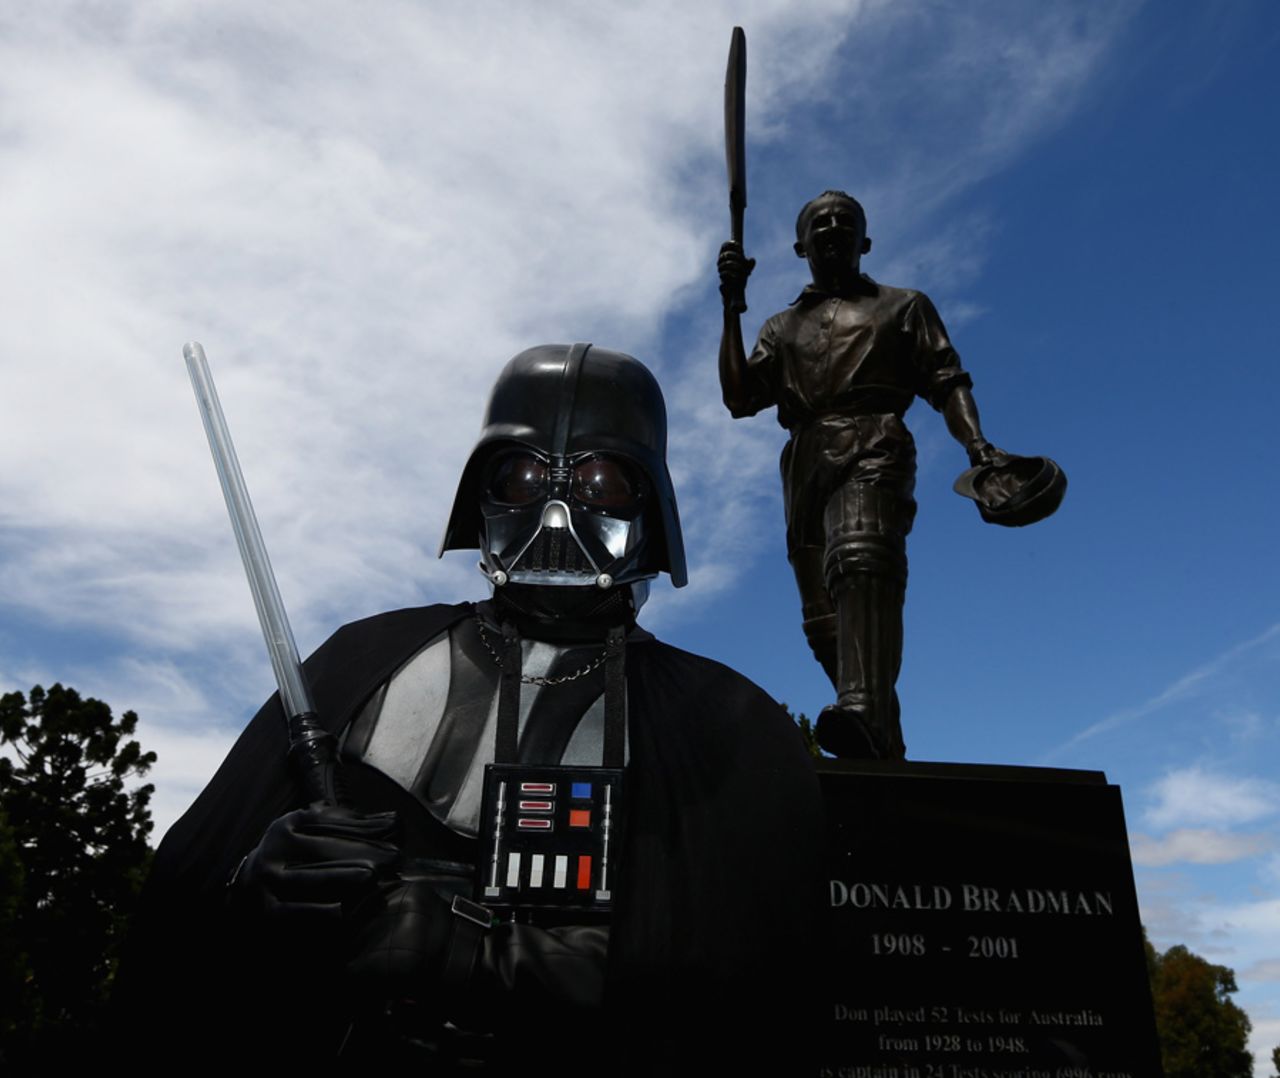 A fan dressed as Darth Vader poses in front of a Don Bradman statue, Australia v West Indies, 5th ODI, Melbourne, February 10, 2013